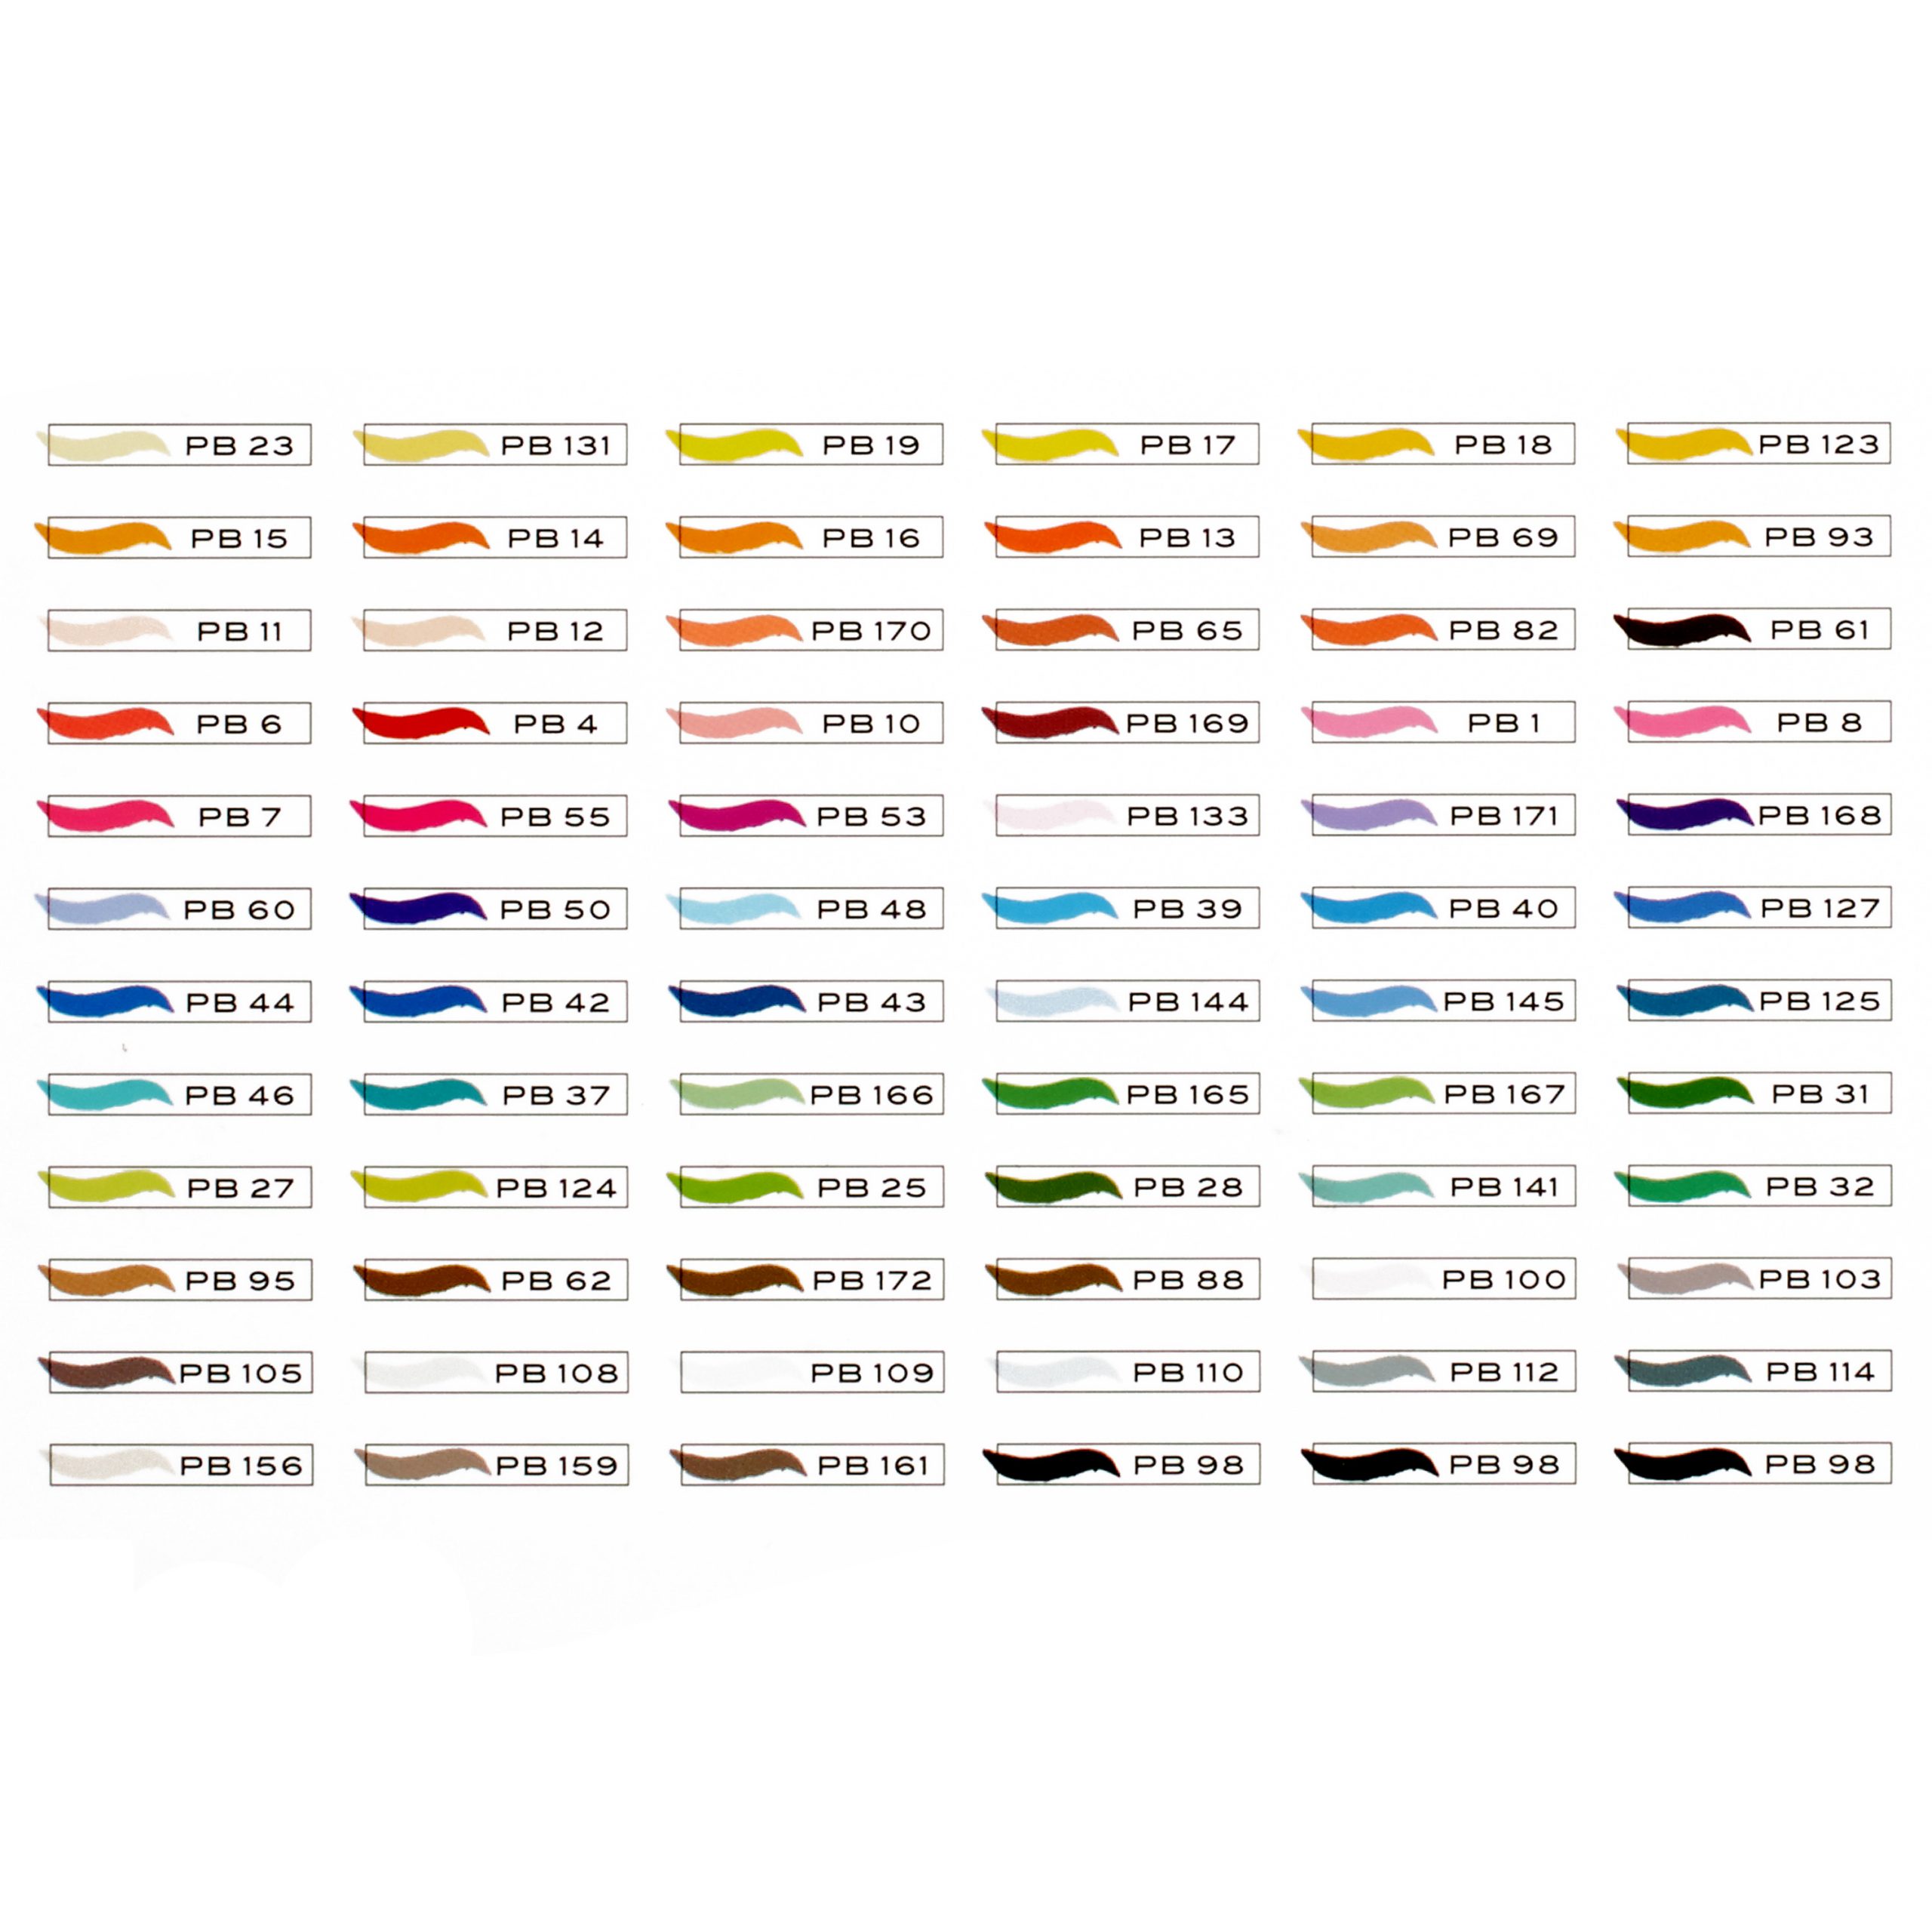 1773303-prismacolor-markers-premierbrush-package-colorkey